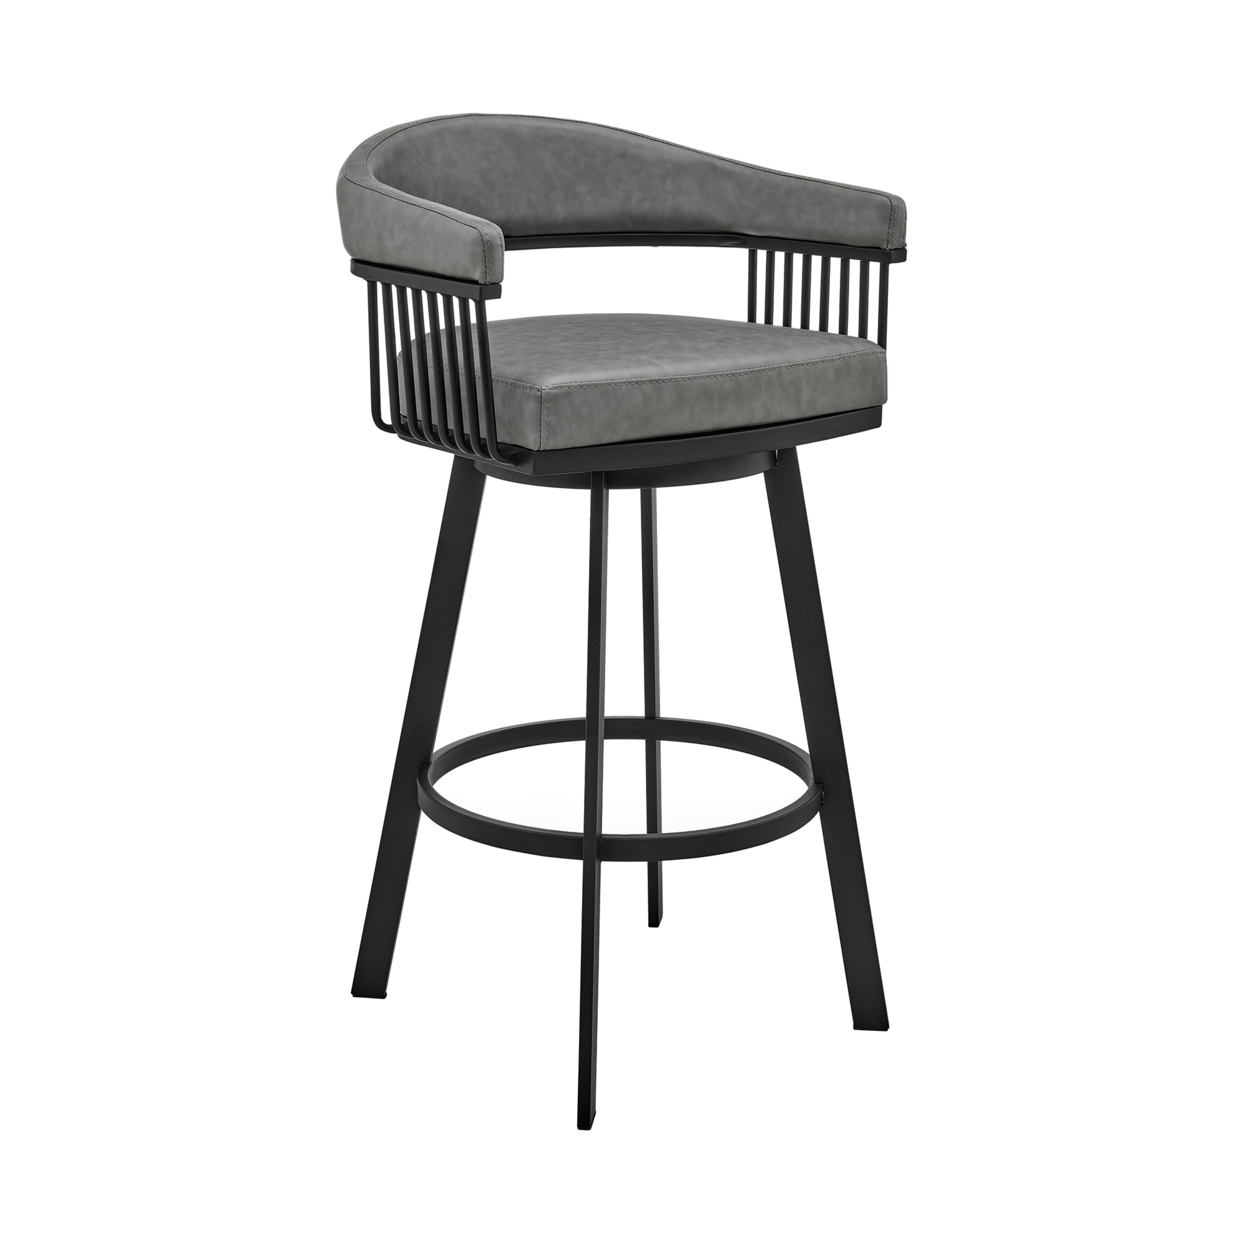 Swivel Barstool With Open Design Metal Frame And Slatted Arms, Gray And Black- Saltoro Sherpi